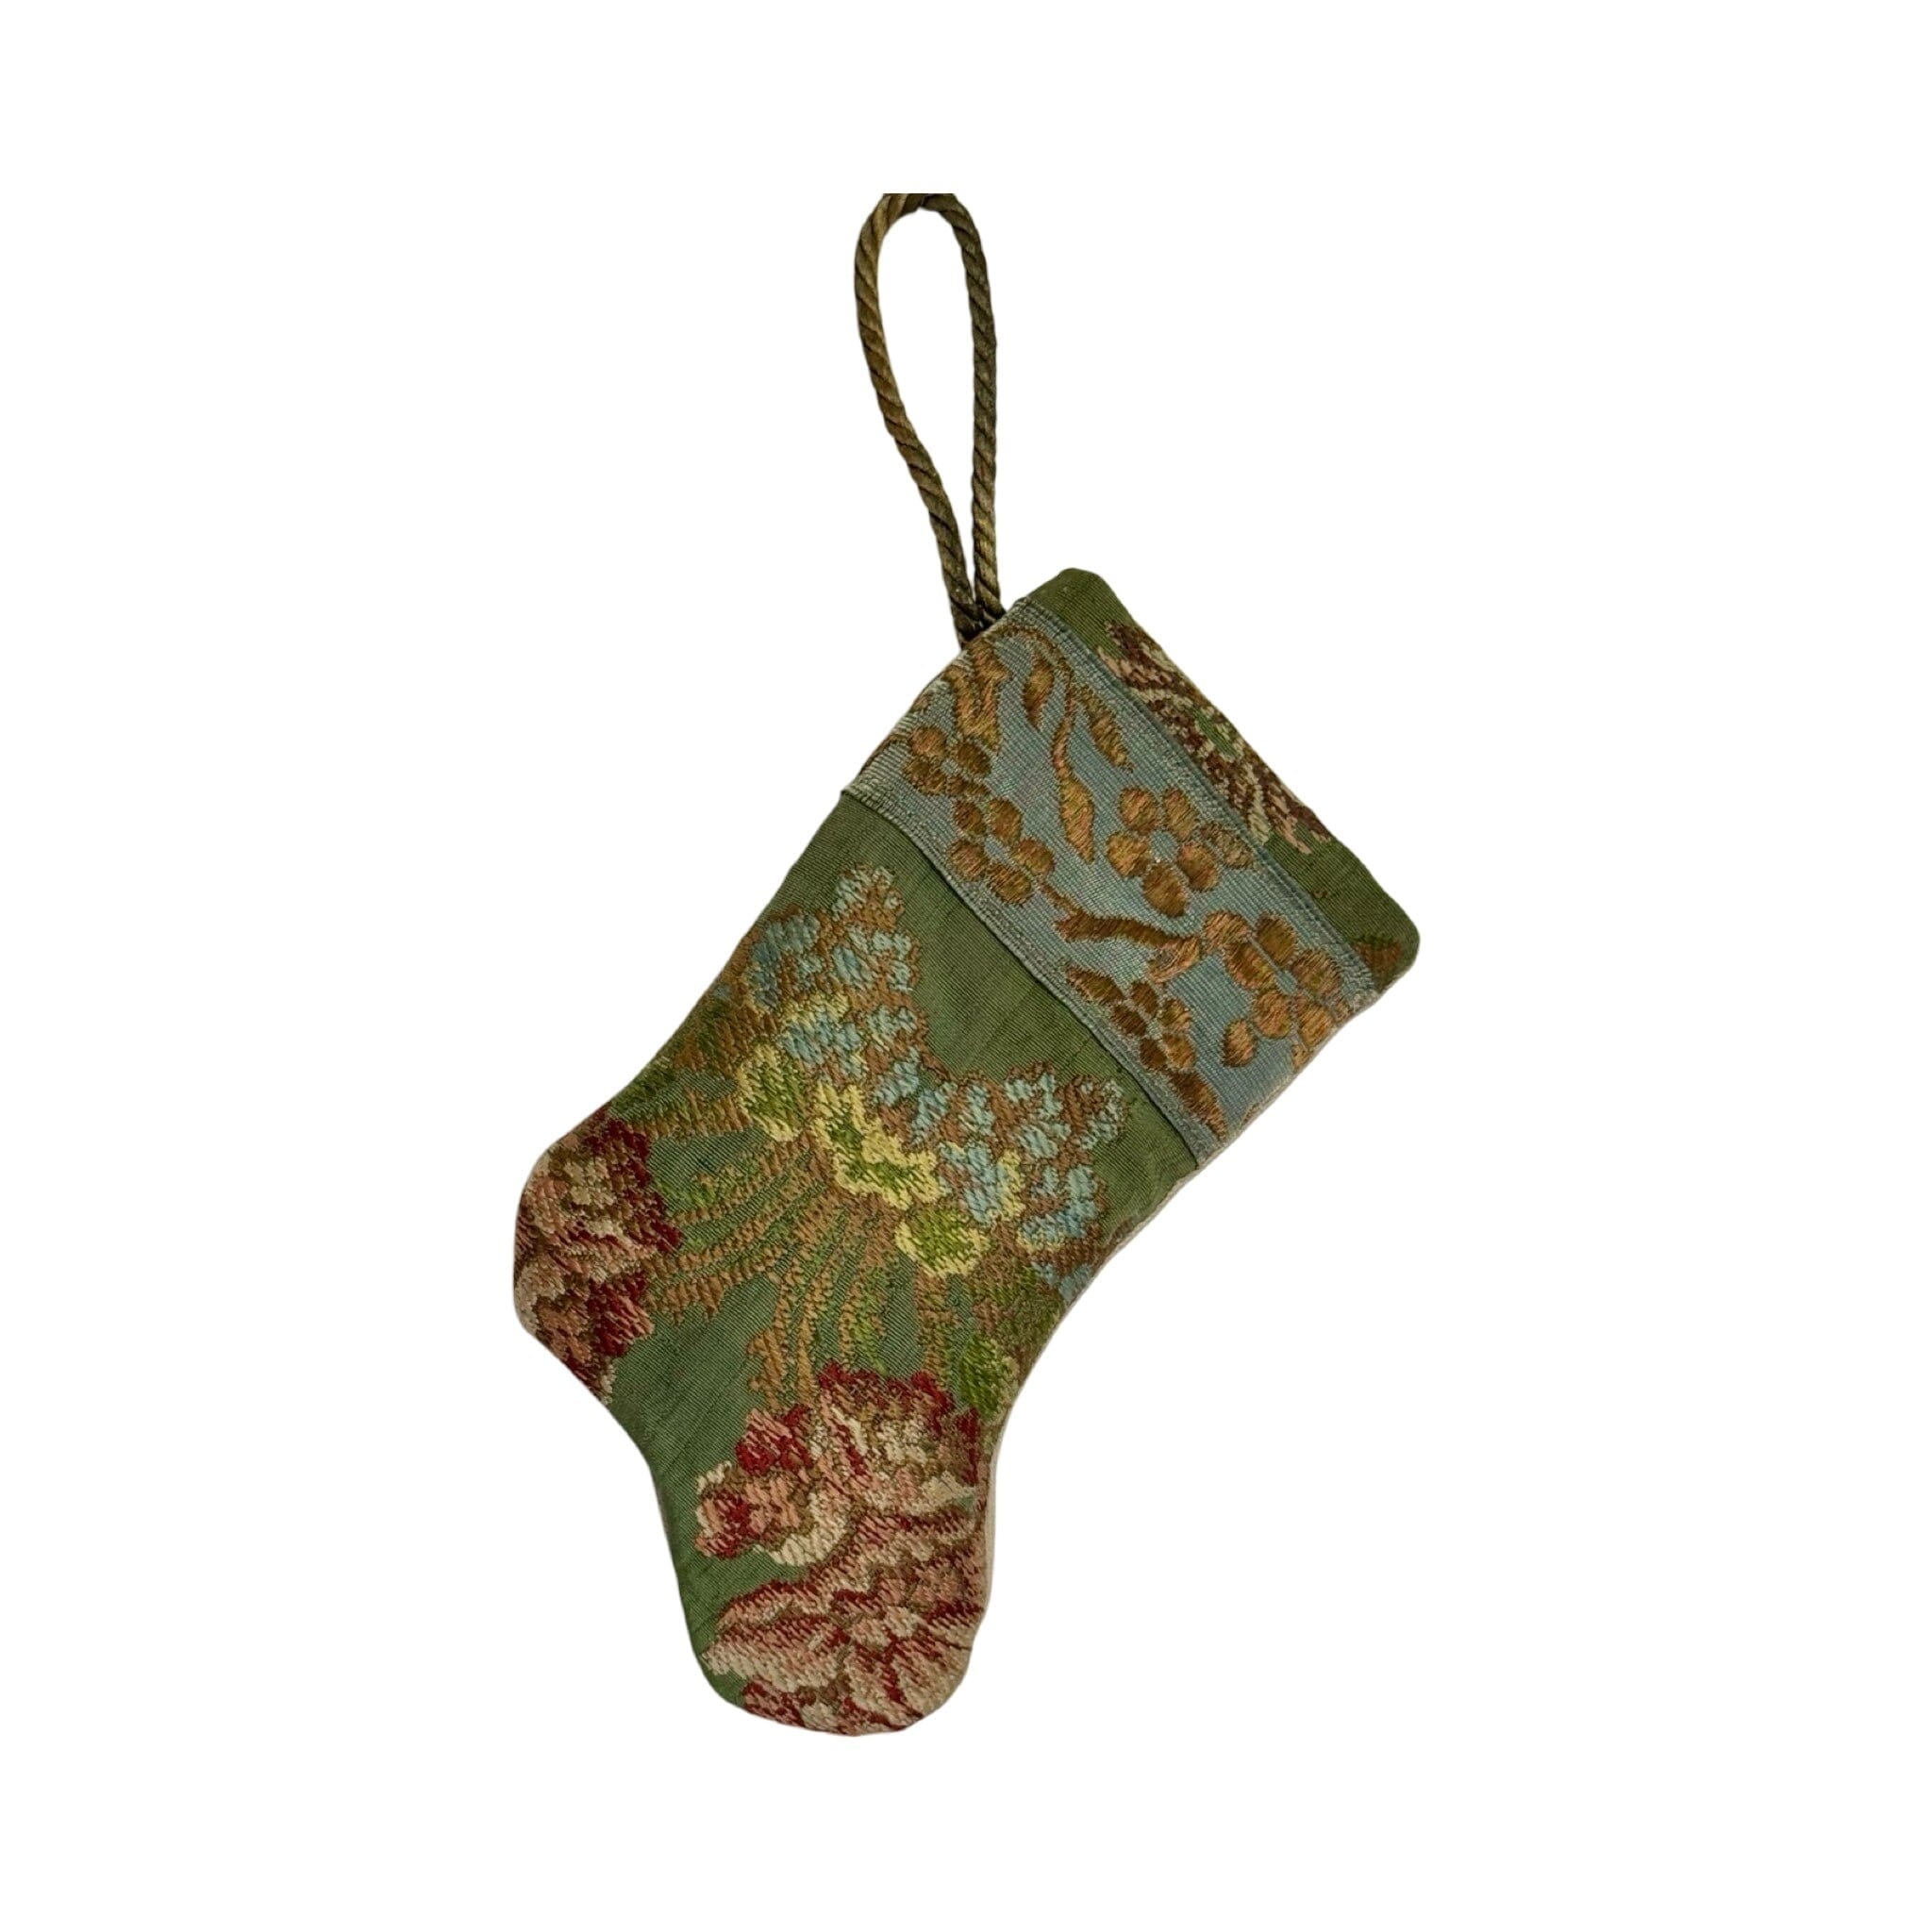 Handmade Mini Stocking Made From Vintage Fabric and Trims- Green Floral Ornament B. Viz Design E 